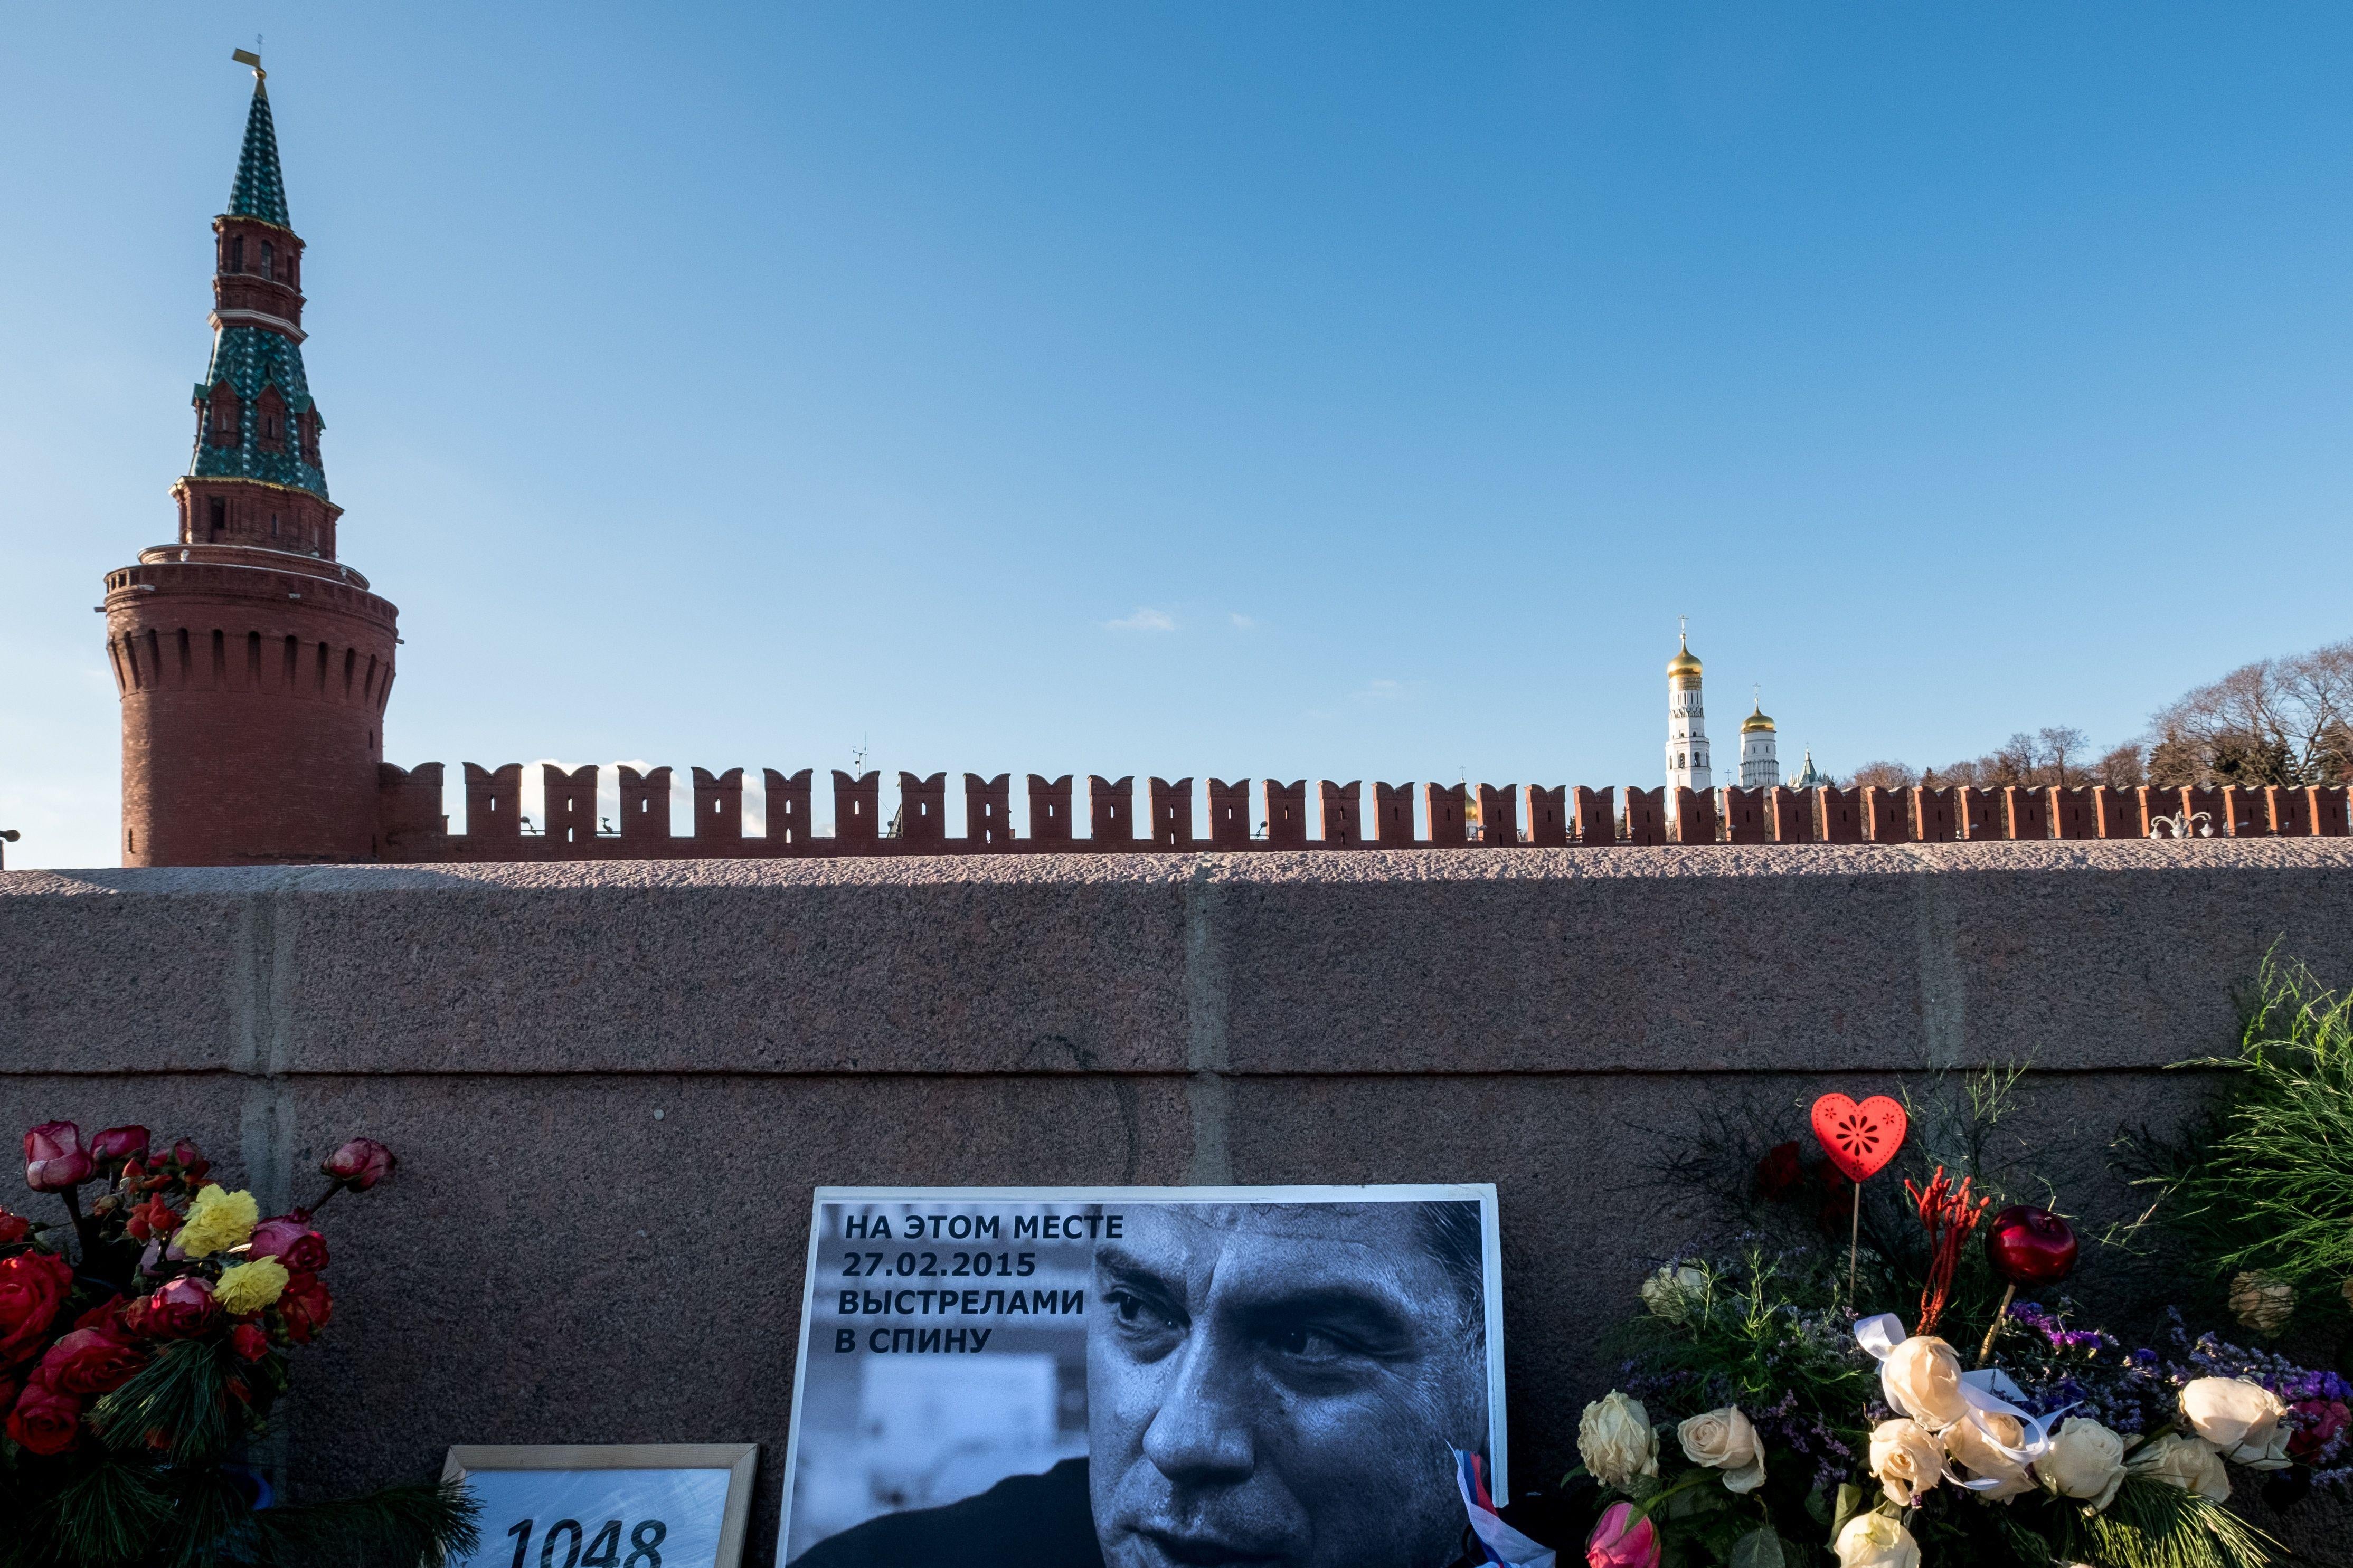 A view shows floral tributes and an image of Boris Nemtsov at the site where opposition leader was fatally shot on a bridge near the Kremlin, in Moscow on January 10, 2018.
The District of Columbia Council on January 9, 2018 approved the bill on renaming a stretch of Wisconsin Avenue outside the Russian Embassy in Washington to Boris Nemtsov Plaza. / AFP PHOTO / Yuri KADOBNOV        (Photo credit should read YURI KADOBNOV/AFP/Getty Images)